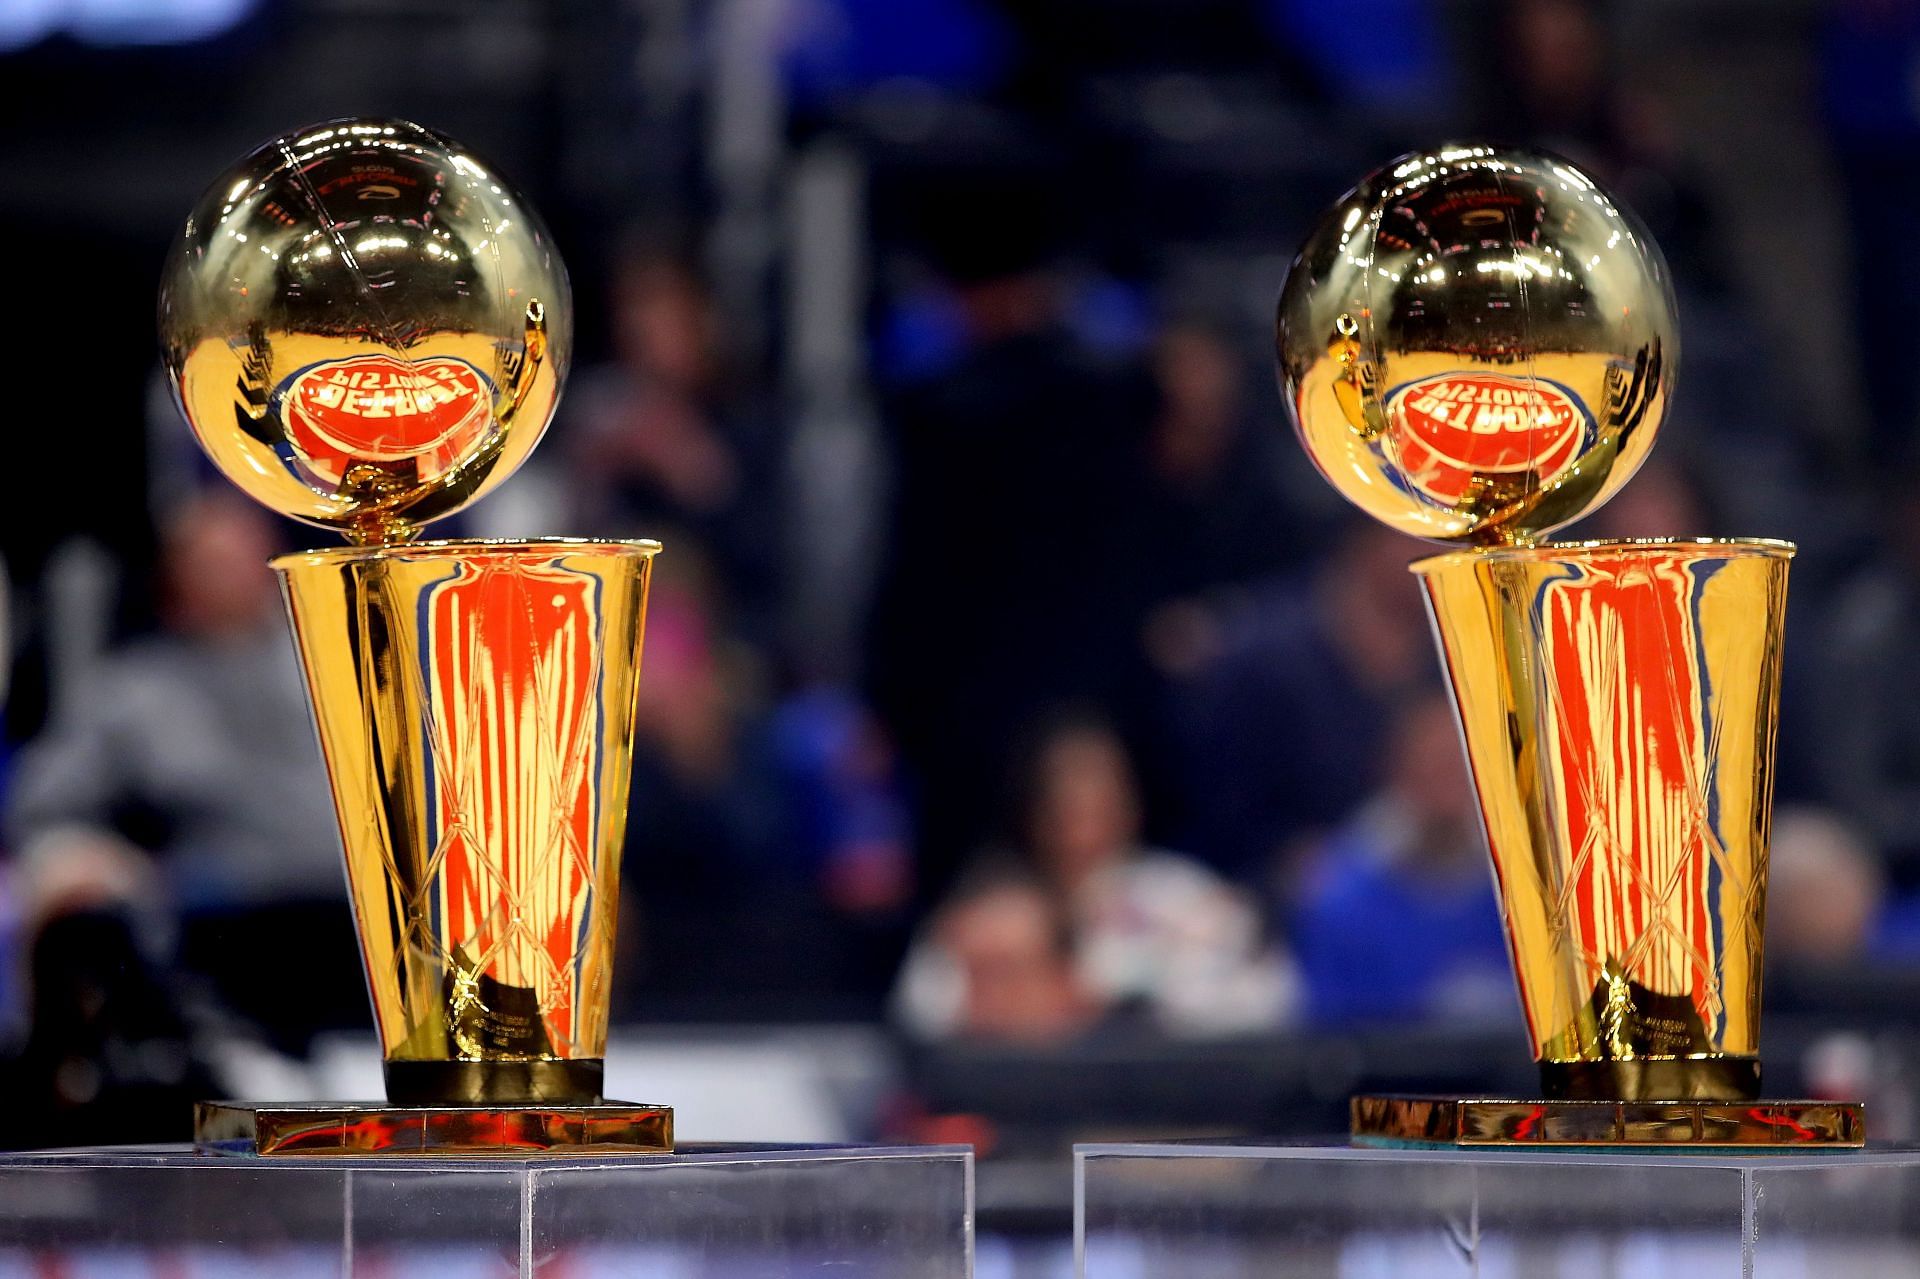 View of the 1989 and 1990 Detroit Piston championship trophies at Little Caesars Arena on March 30, 2019 in Detroit, Michigan.